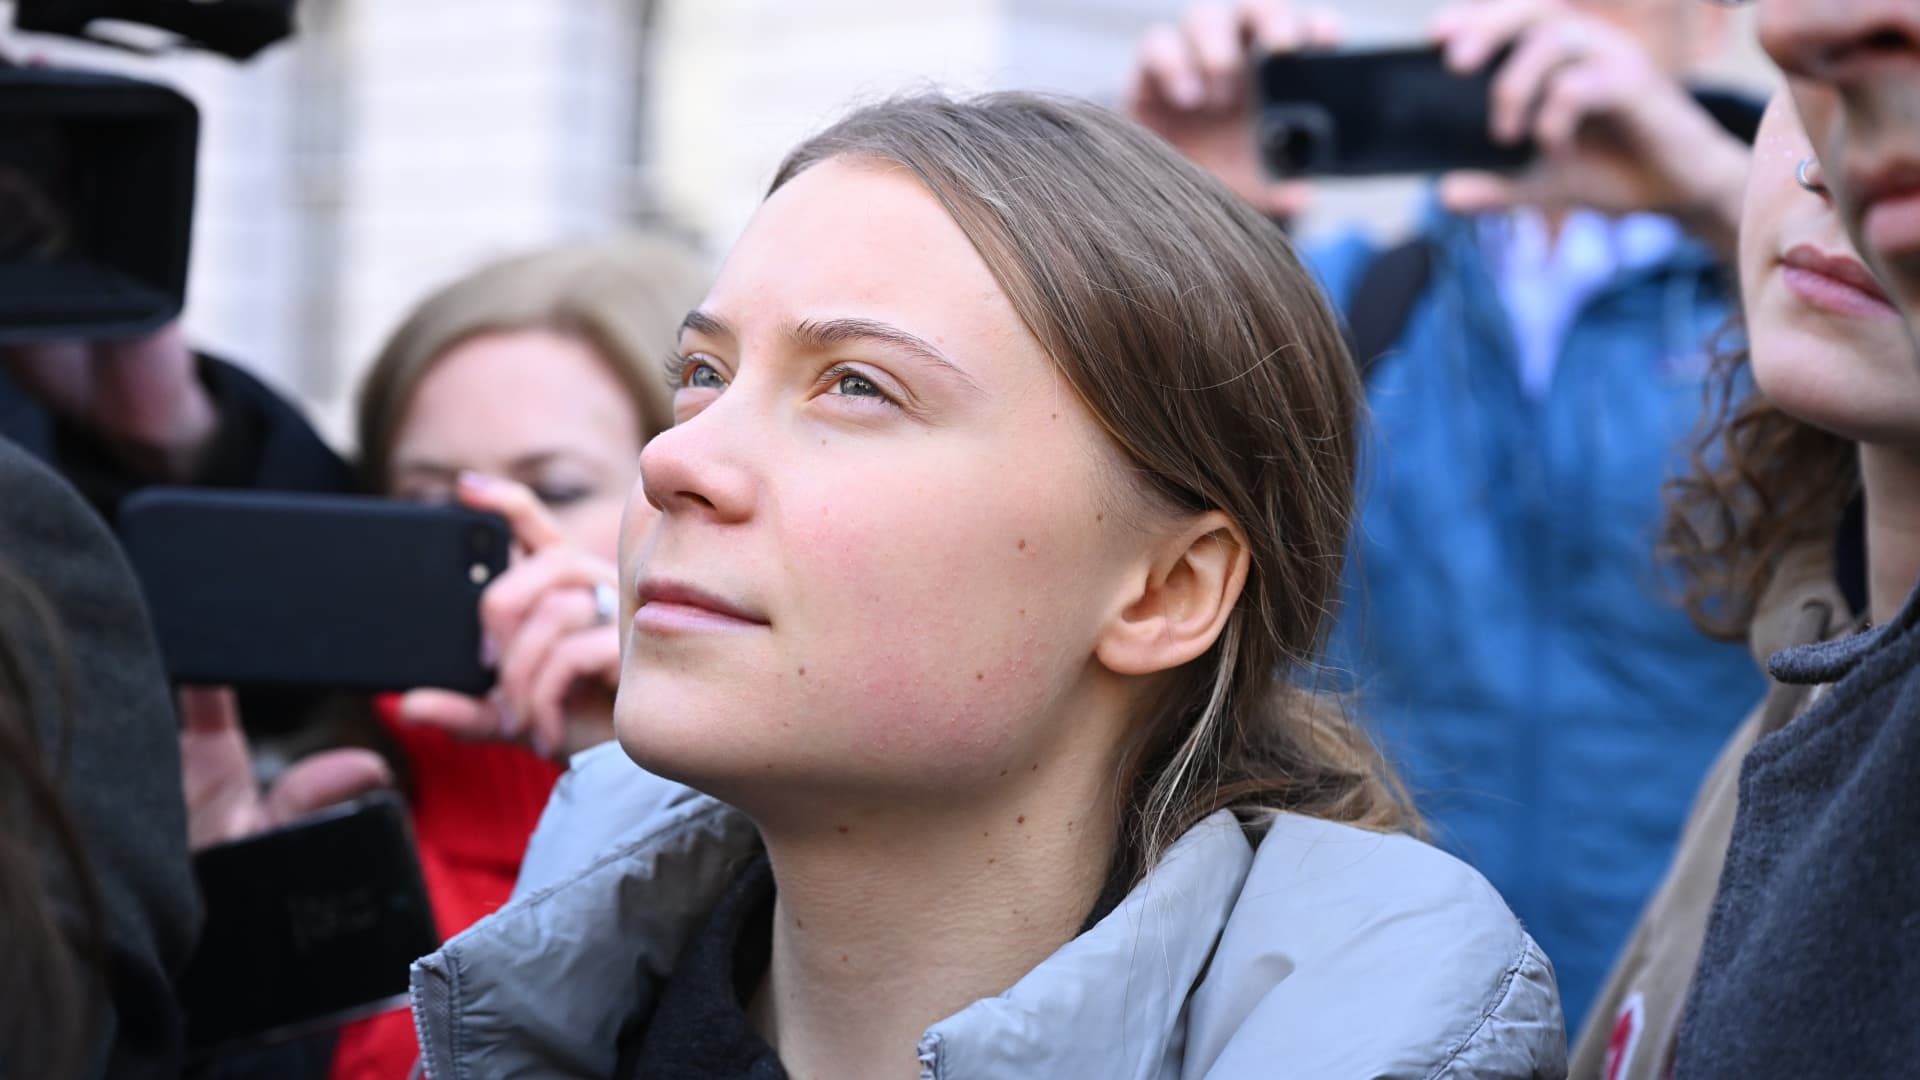 Climate activist Greta Thunberg cleared of public order offense during London oil protest